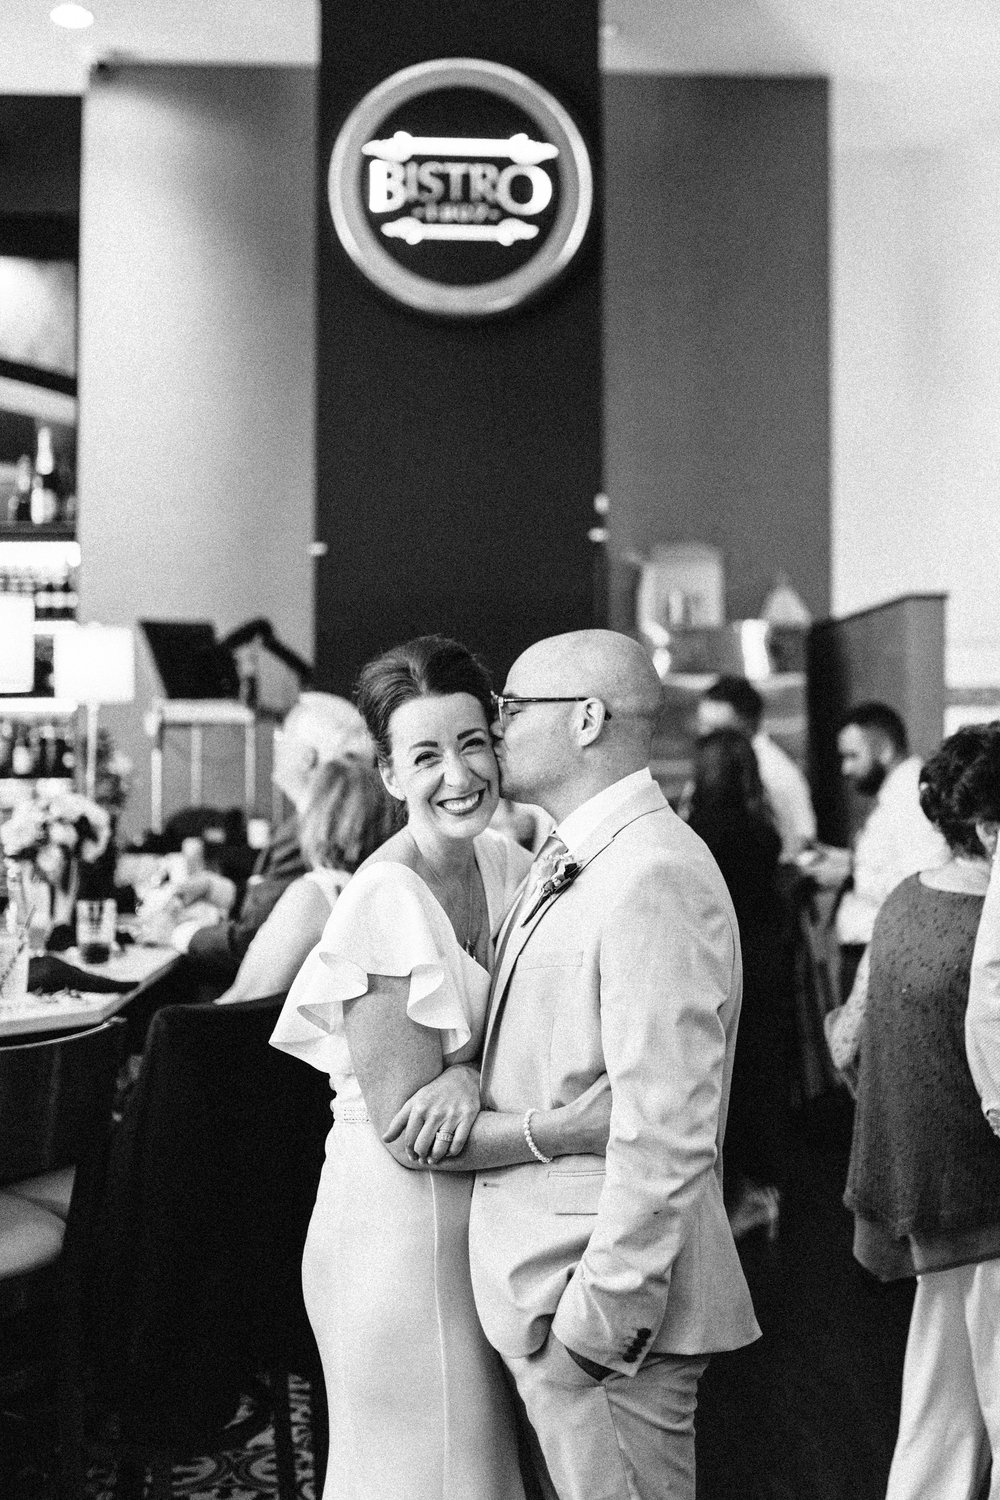 intimate summer wedding fourth of july weekend bistro 1907 downtown youngstown doubletree by hilton federal street lauren lindvig youngstown ohio photography by cleveland wedding photographer mae b photo.jpg.jpg.jpg1.jpg